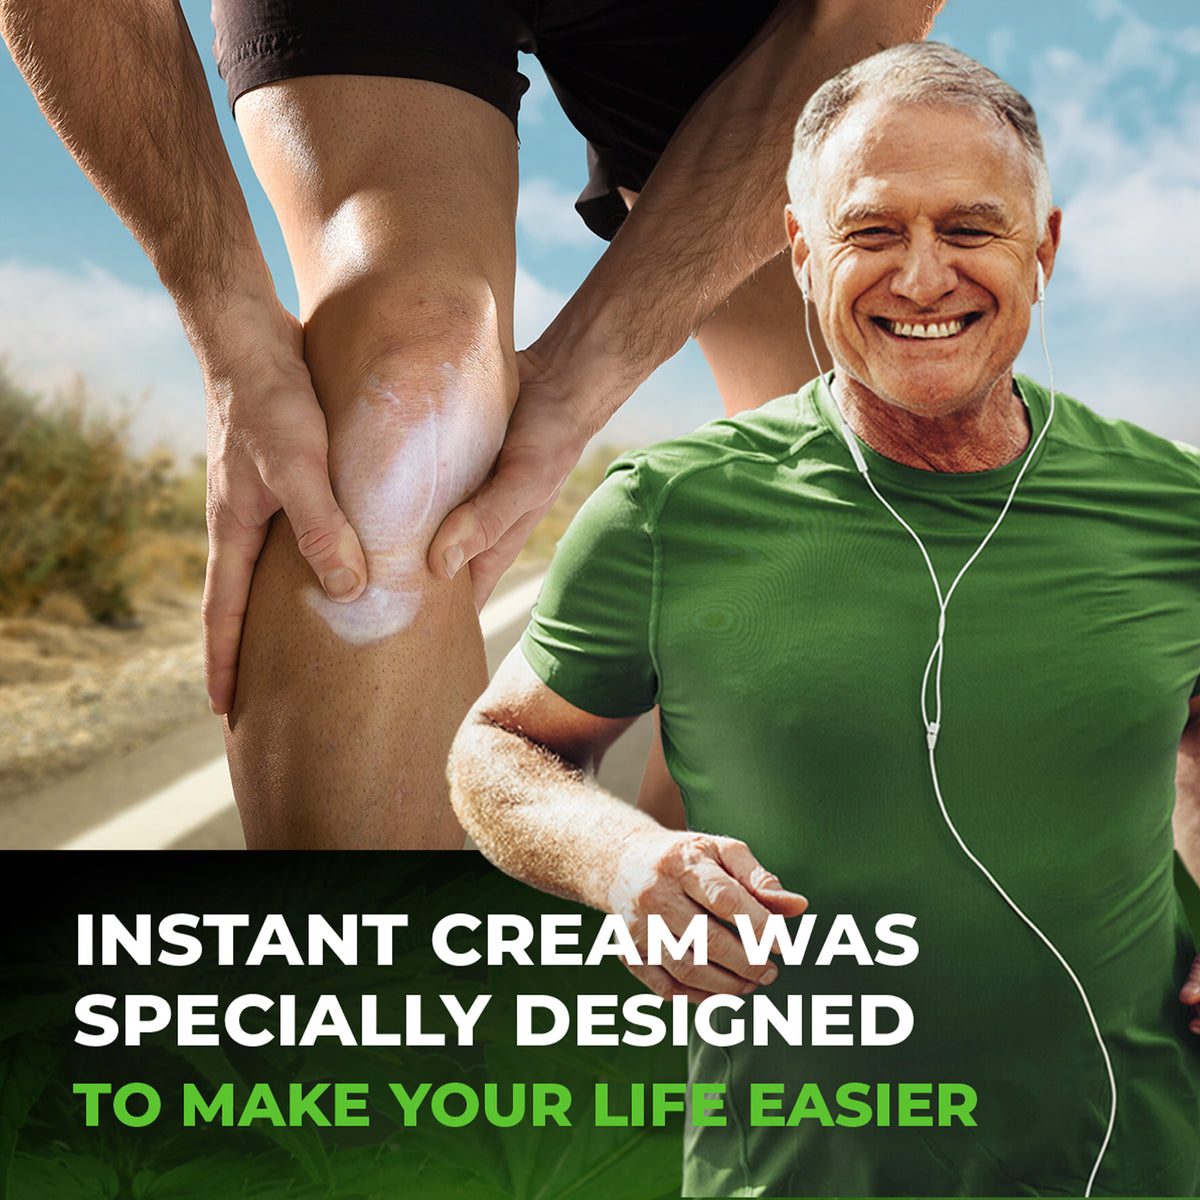 Maximum Strength Pain Relief with Instant Hemp Cream for Body, Back, Hands, Sports